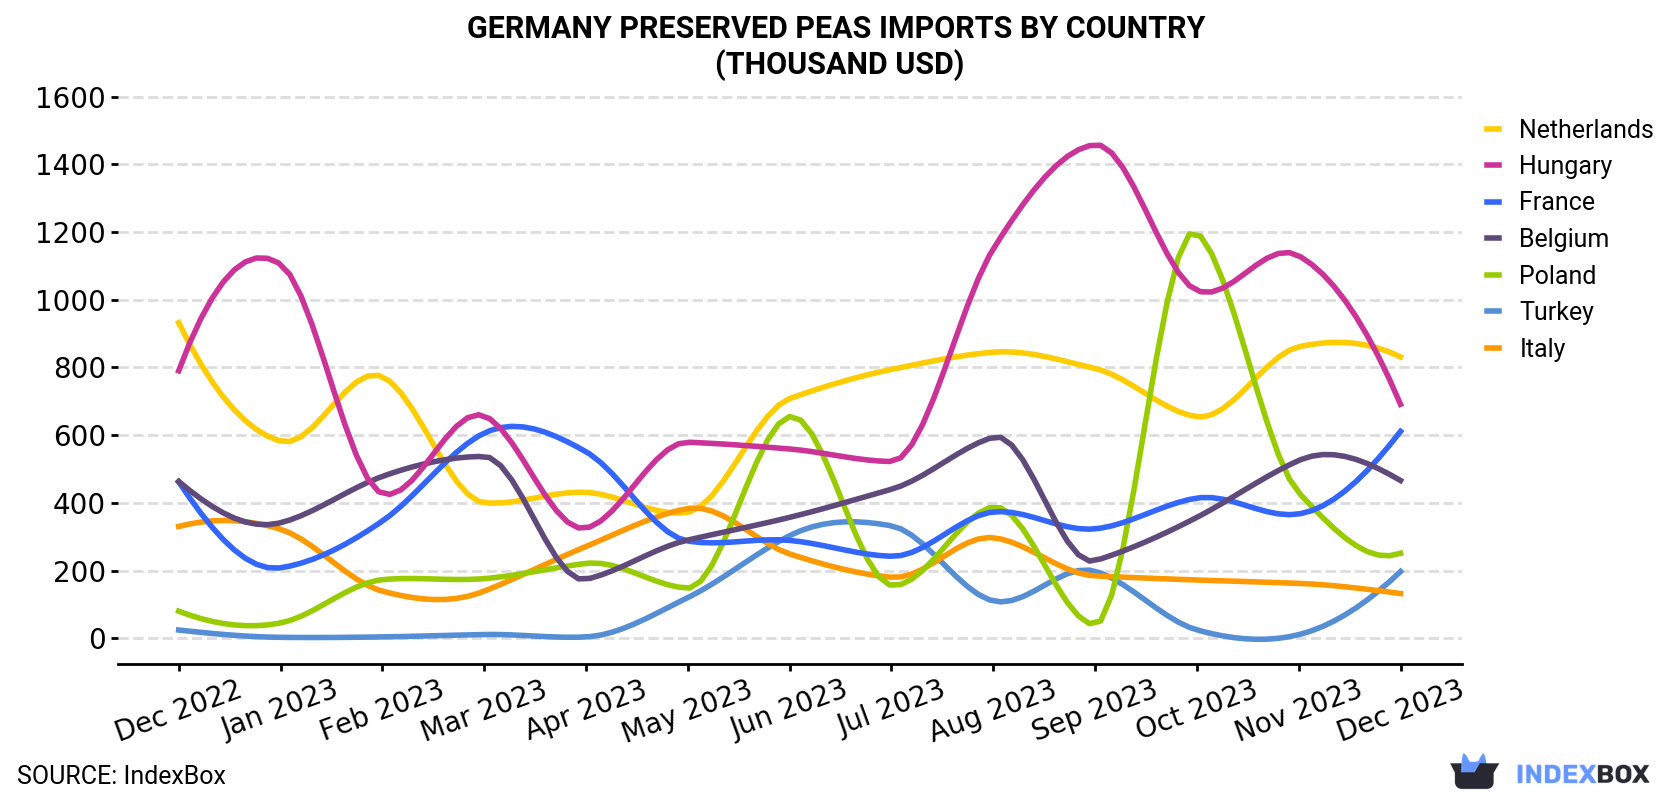 Germany Preserved Peas Imports By Country (Thousand USD)